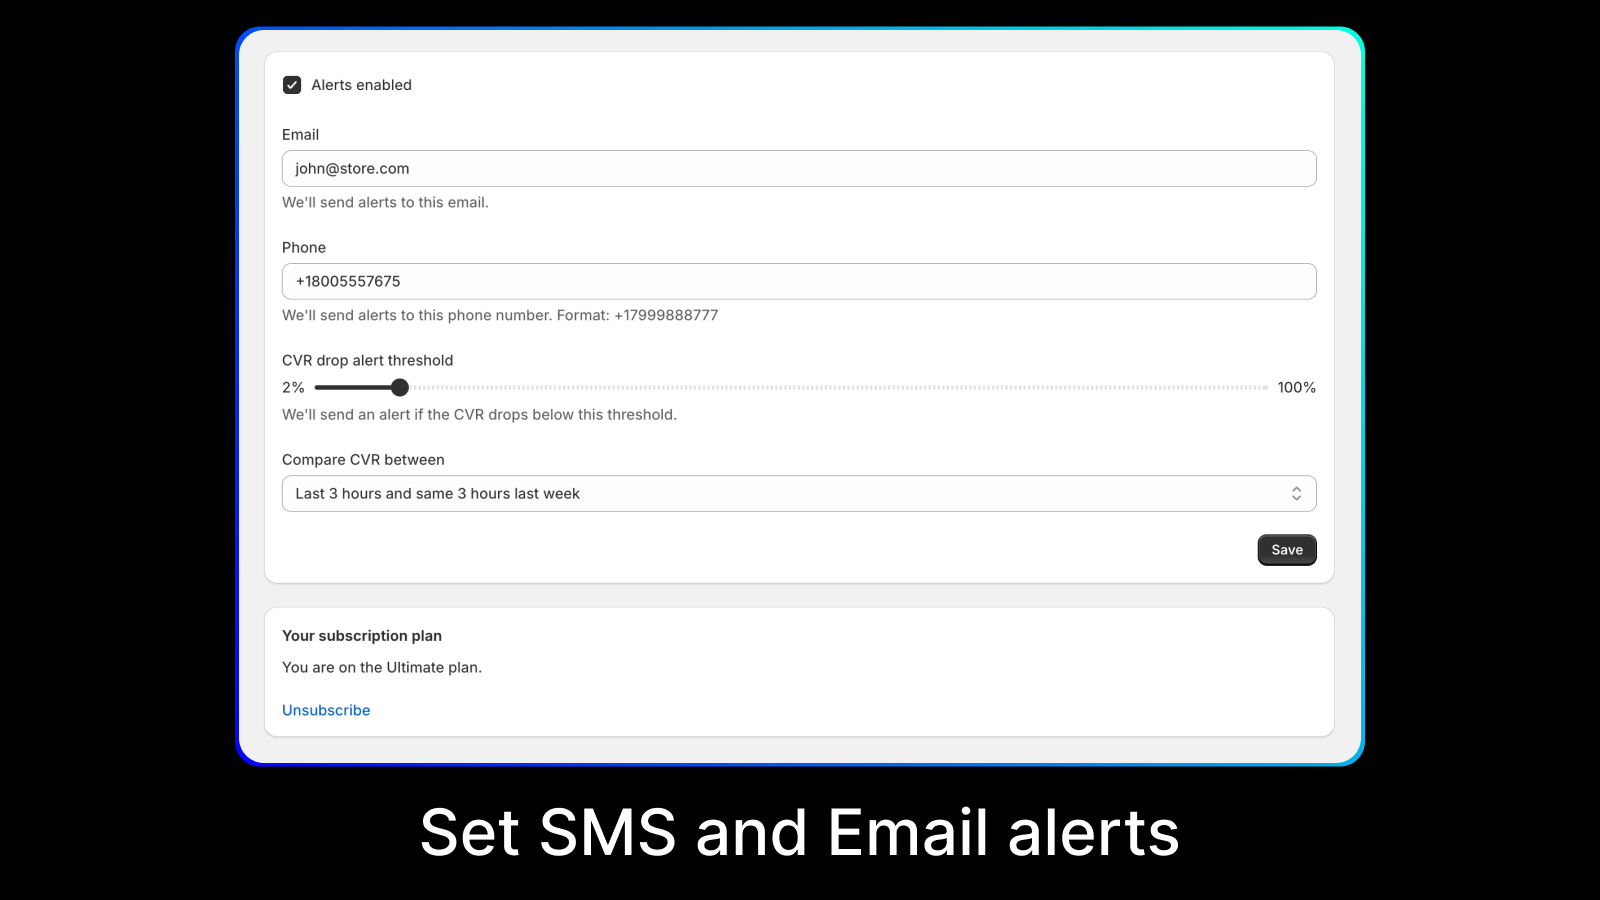 Alertly App Email and SMS notifications settings